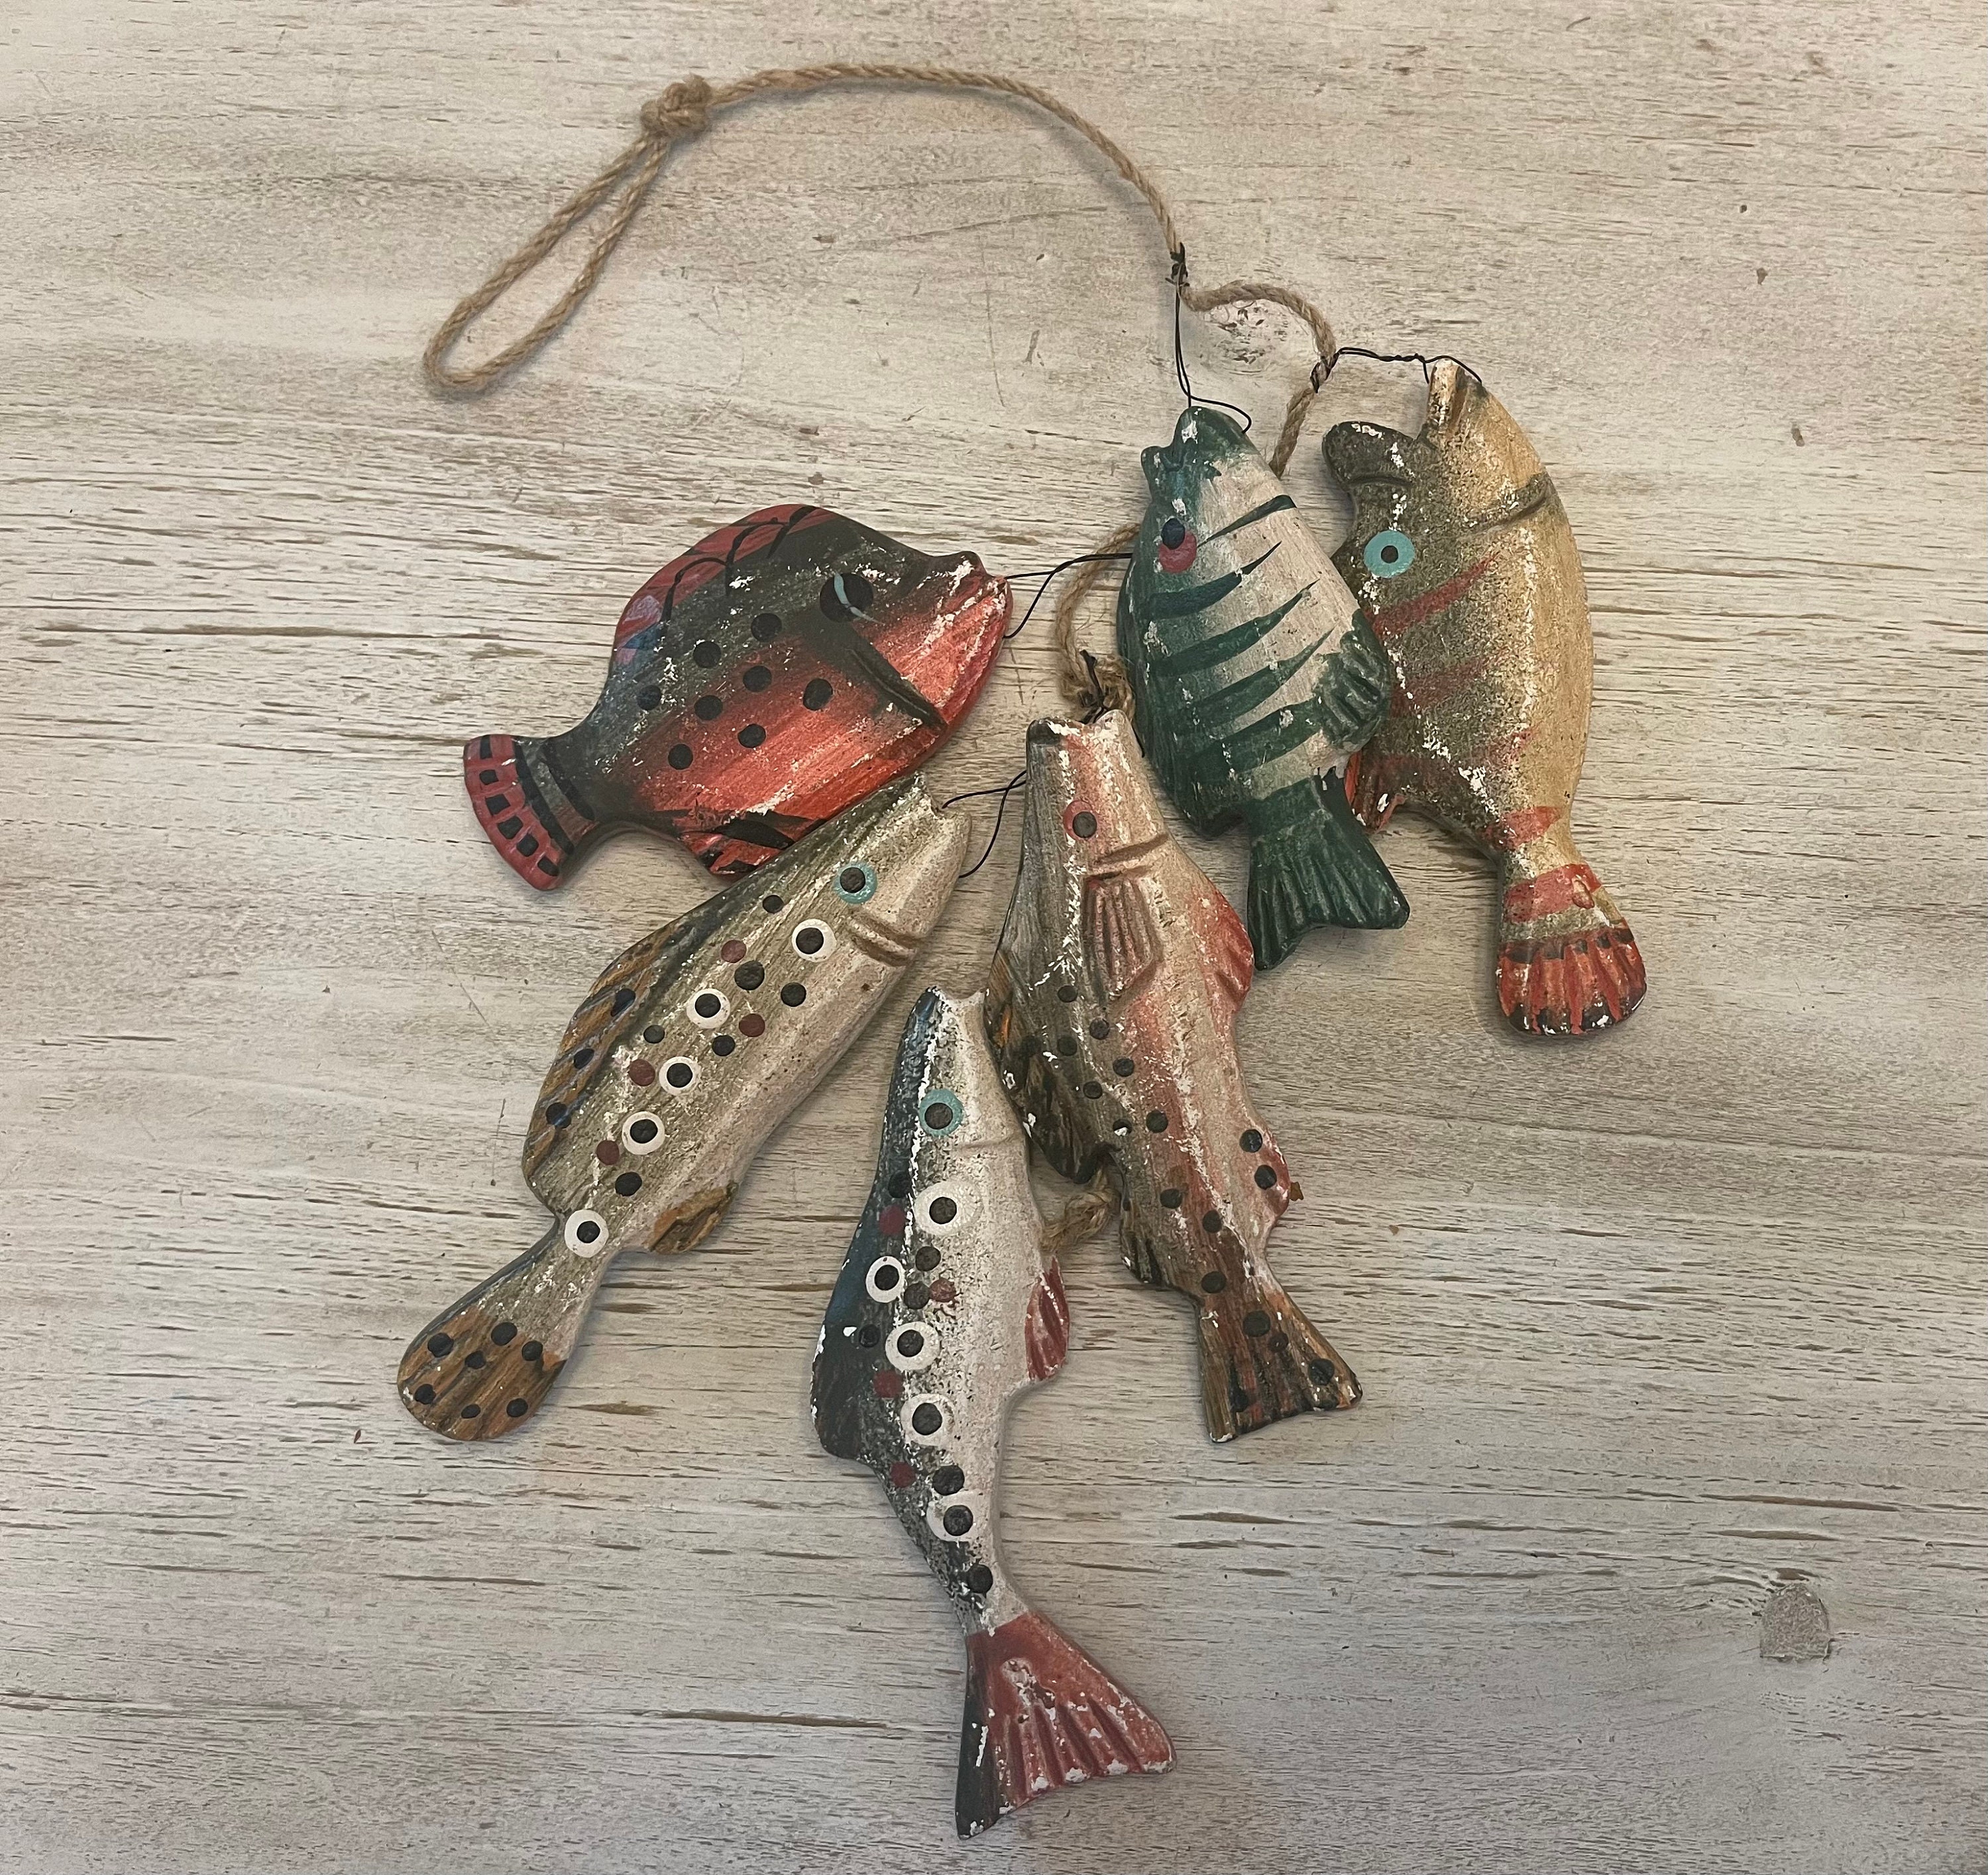 Dragonus Antique Vintage Wooden Fish Decor Hanging Wood Fish with Fishing Net Hand Carved Nautical Ornaments Home Wall Decor Hanger Gift, Size: Small